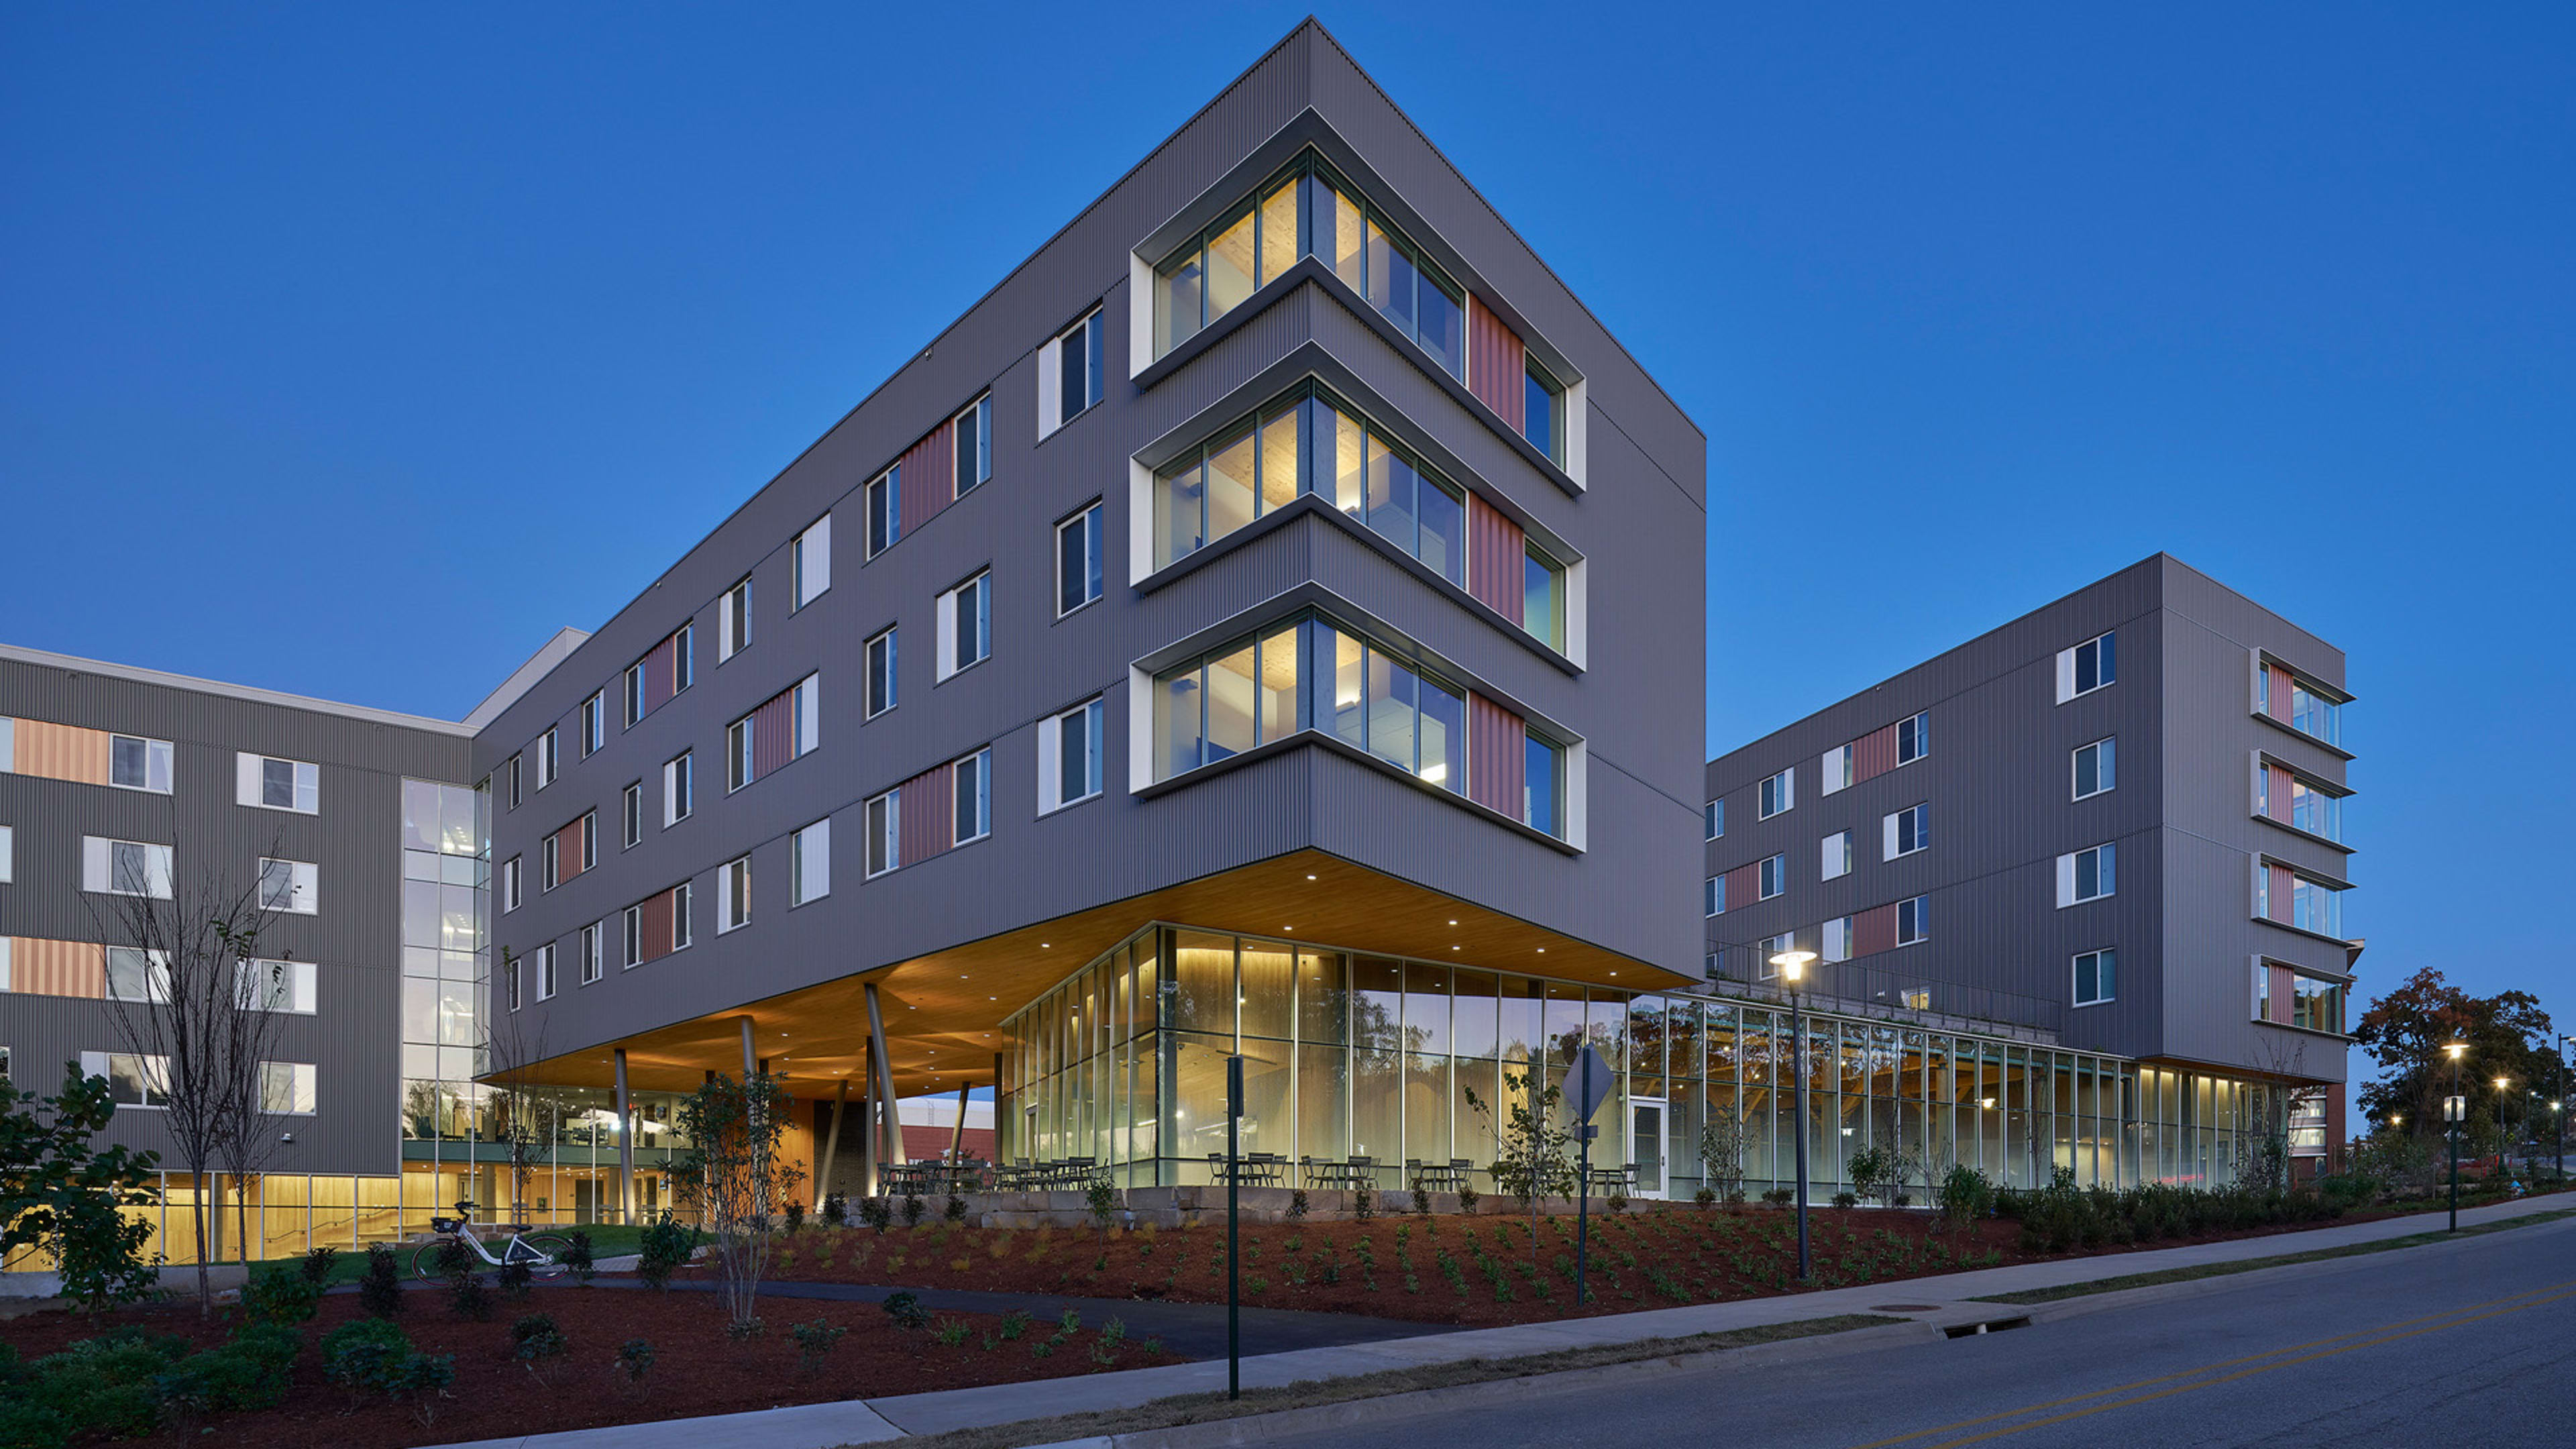 America’s largest timber building is complete, and it may be the future of construction